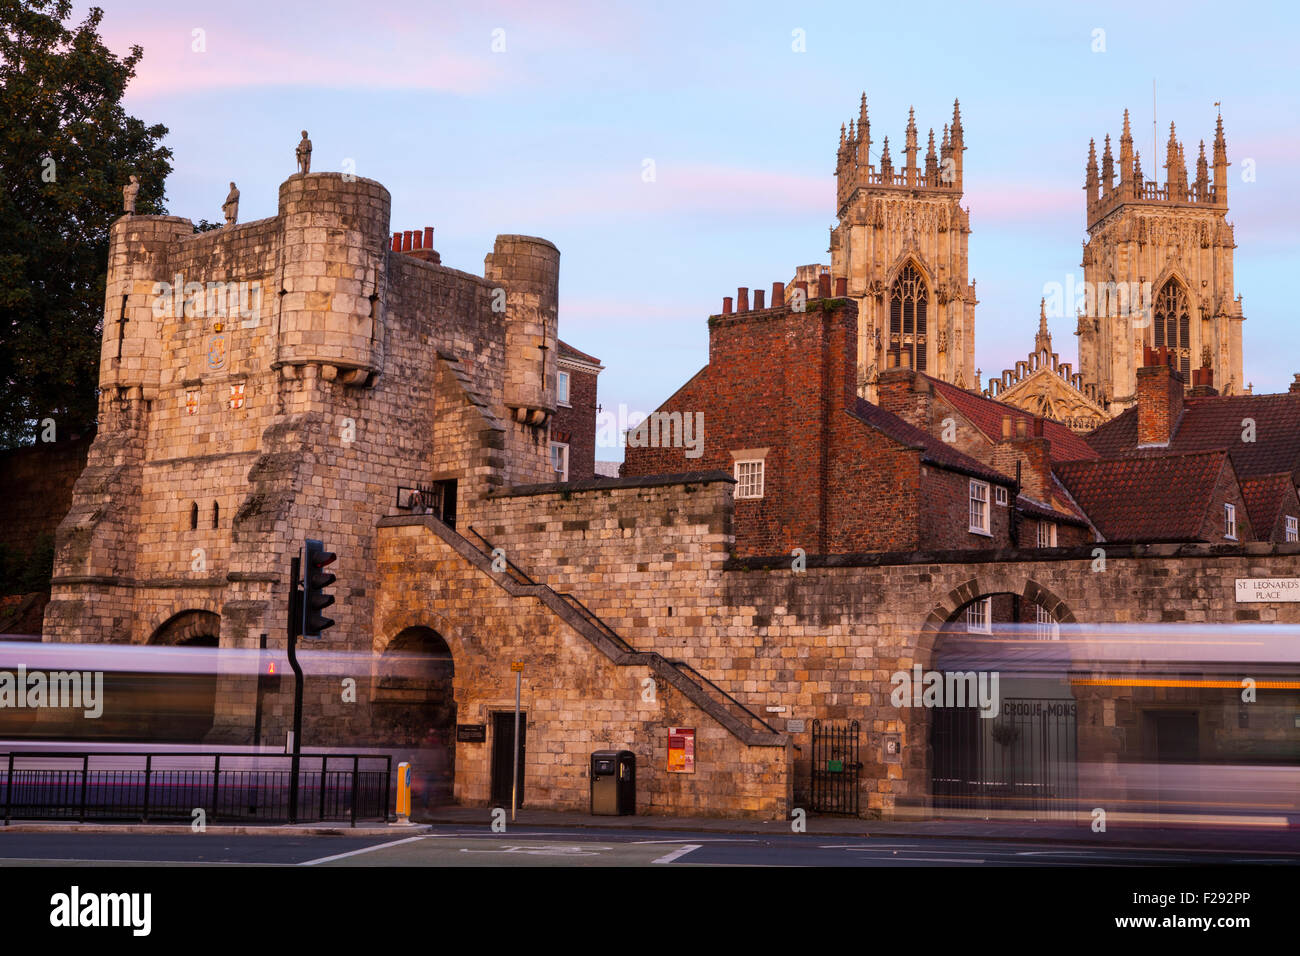 An evening view of Bootham Bar and the towers of York Minster in York, England. Stock Photo